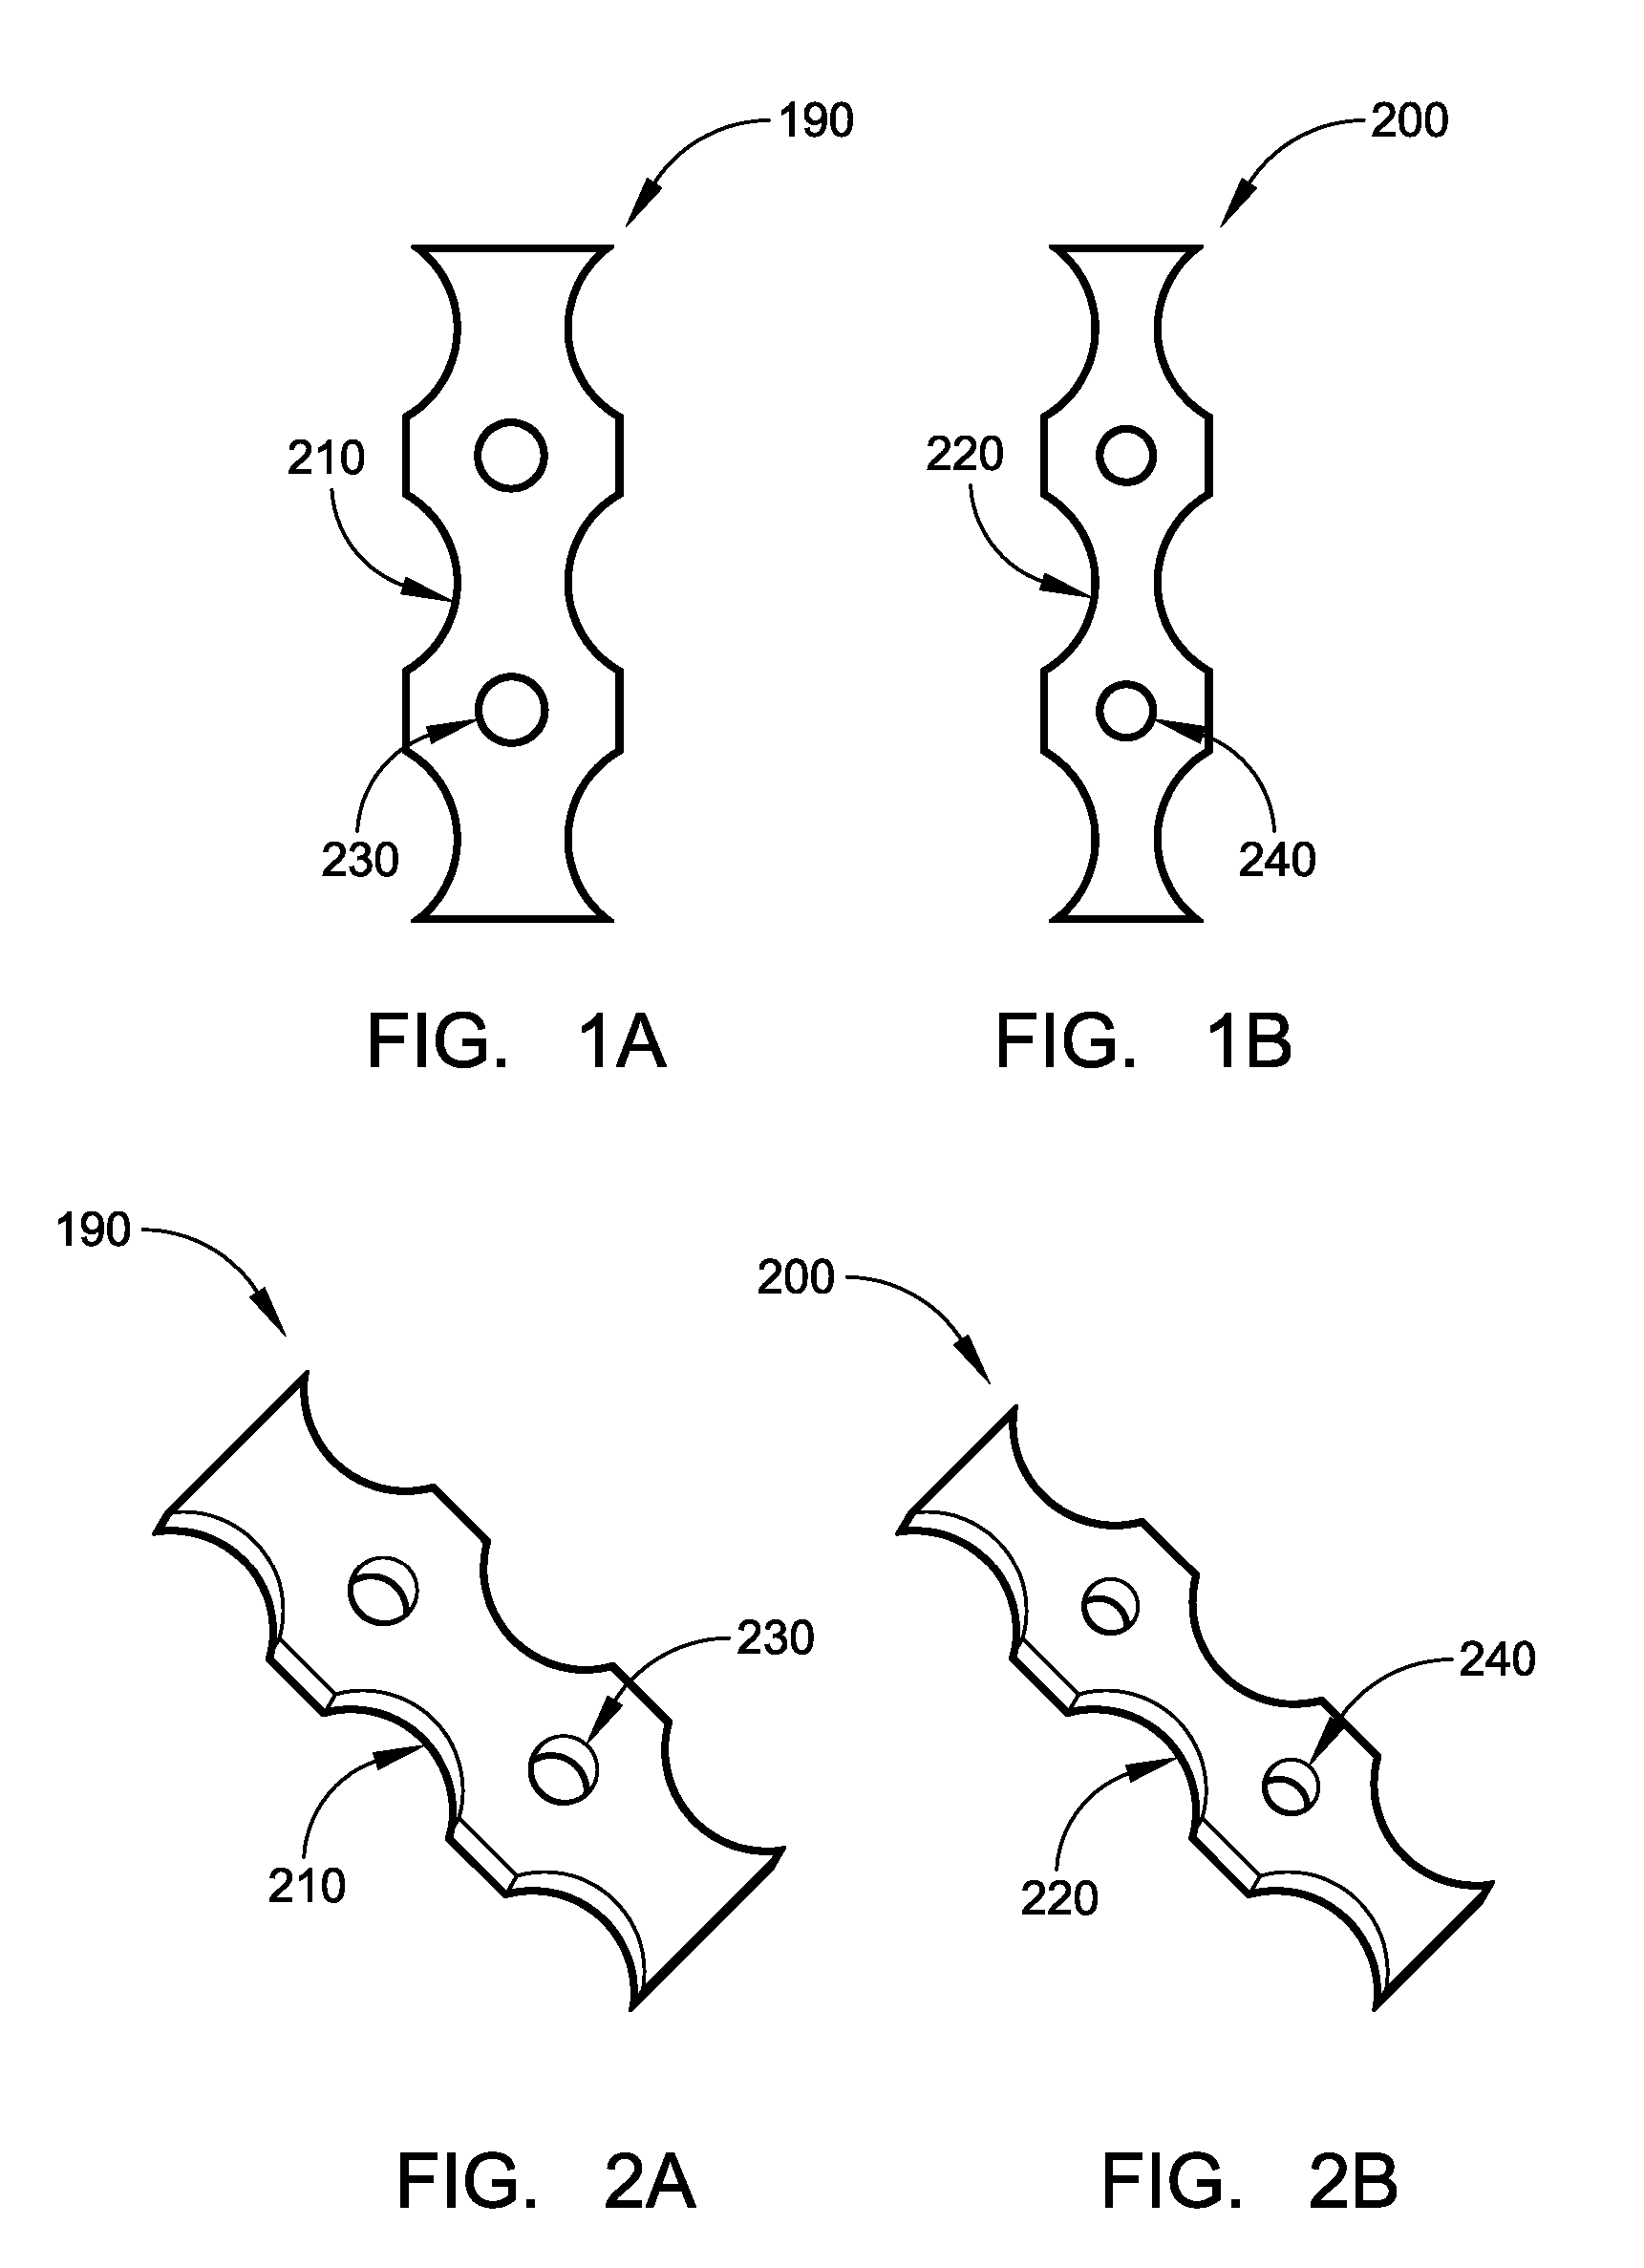 Energy Storage Cell Support Separator and Cooling System for a Multiple Cell Module